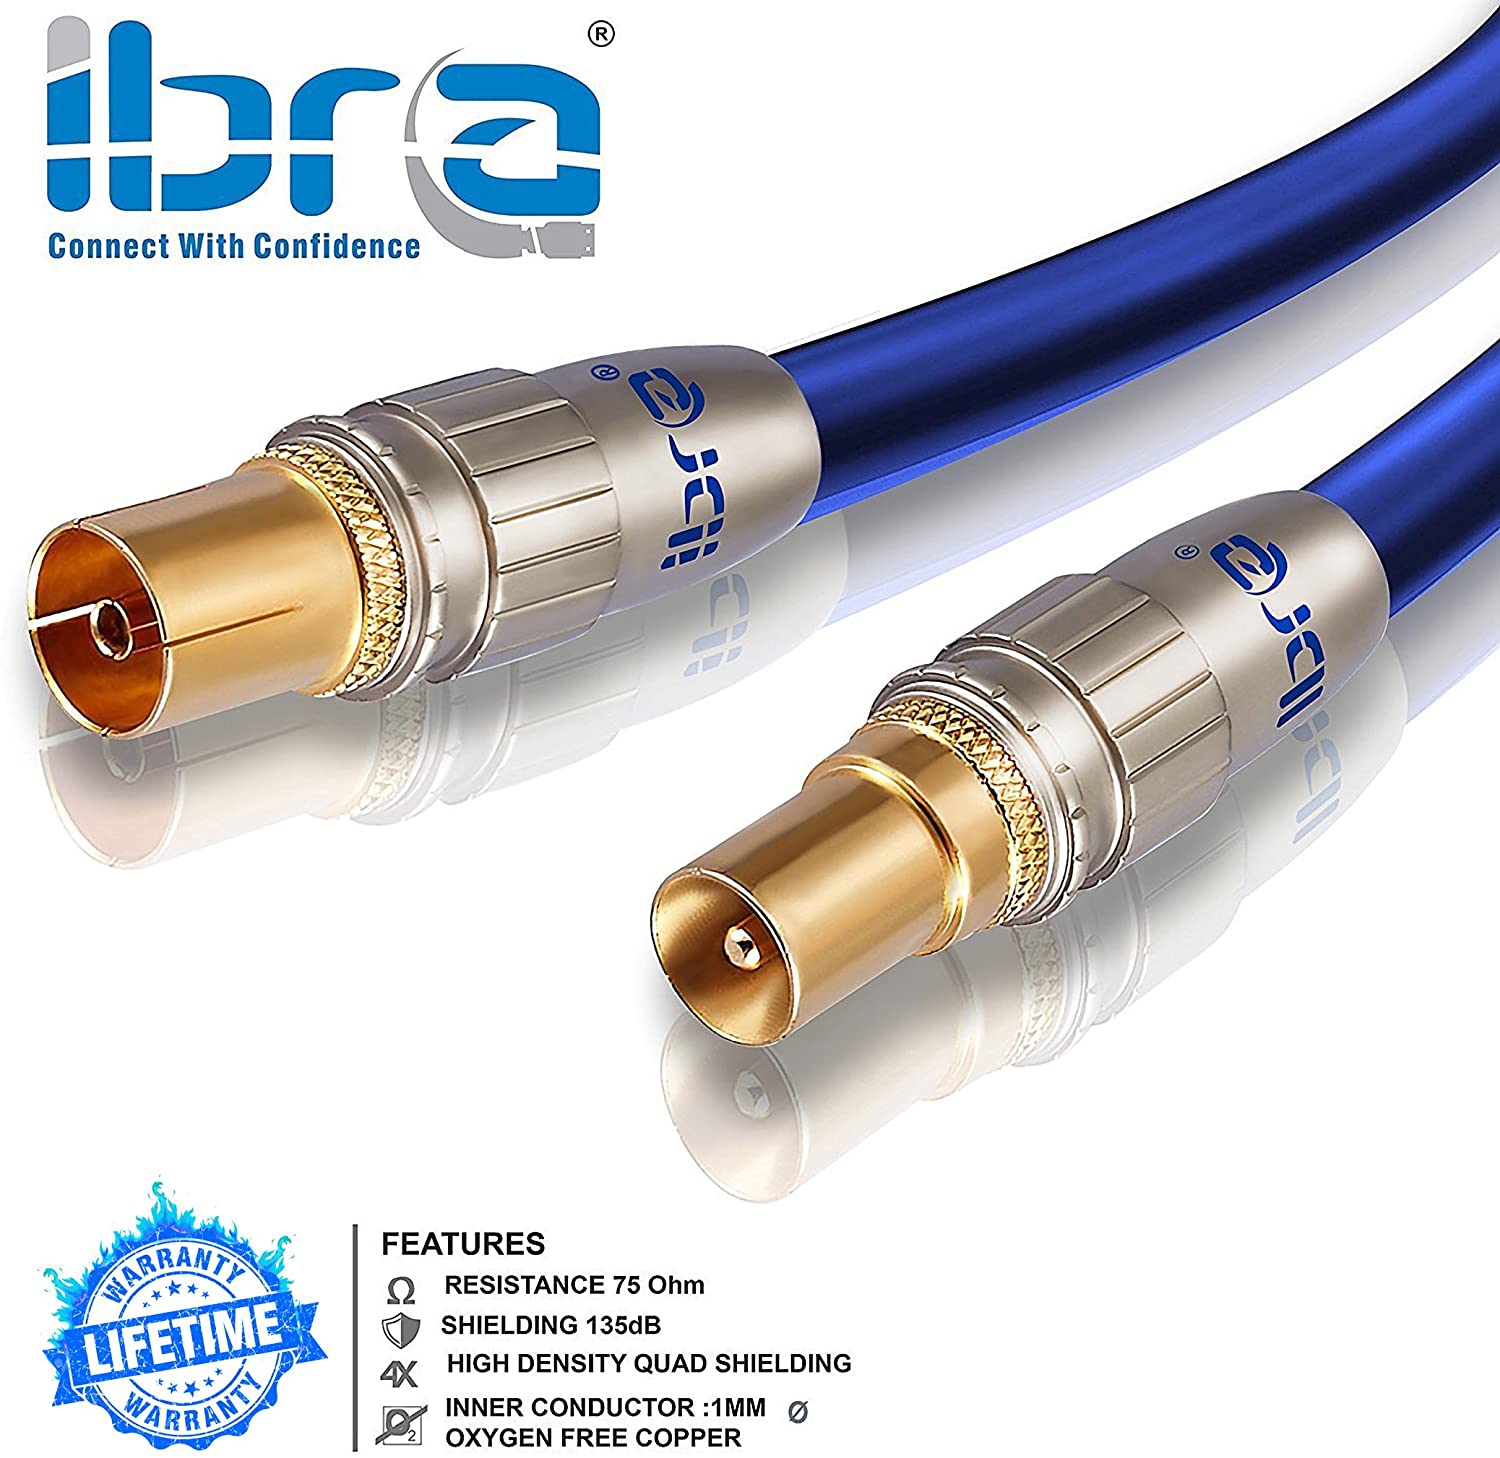 5m HDTV Antenna Cable|TV Aerial Cable|Premium Coaxial Cable|Connectors: Coax Male to Coax Female|For UHF/RF/DVB-T/DVB-T2 TVs, VCRs, DVD players, DVRs, cable boxes and satellite| IBRA Blue Gold